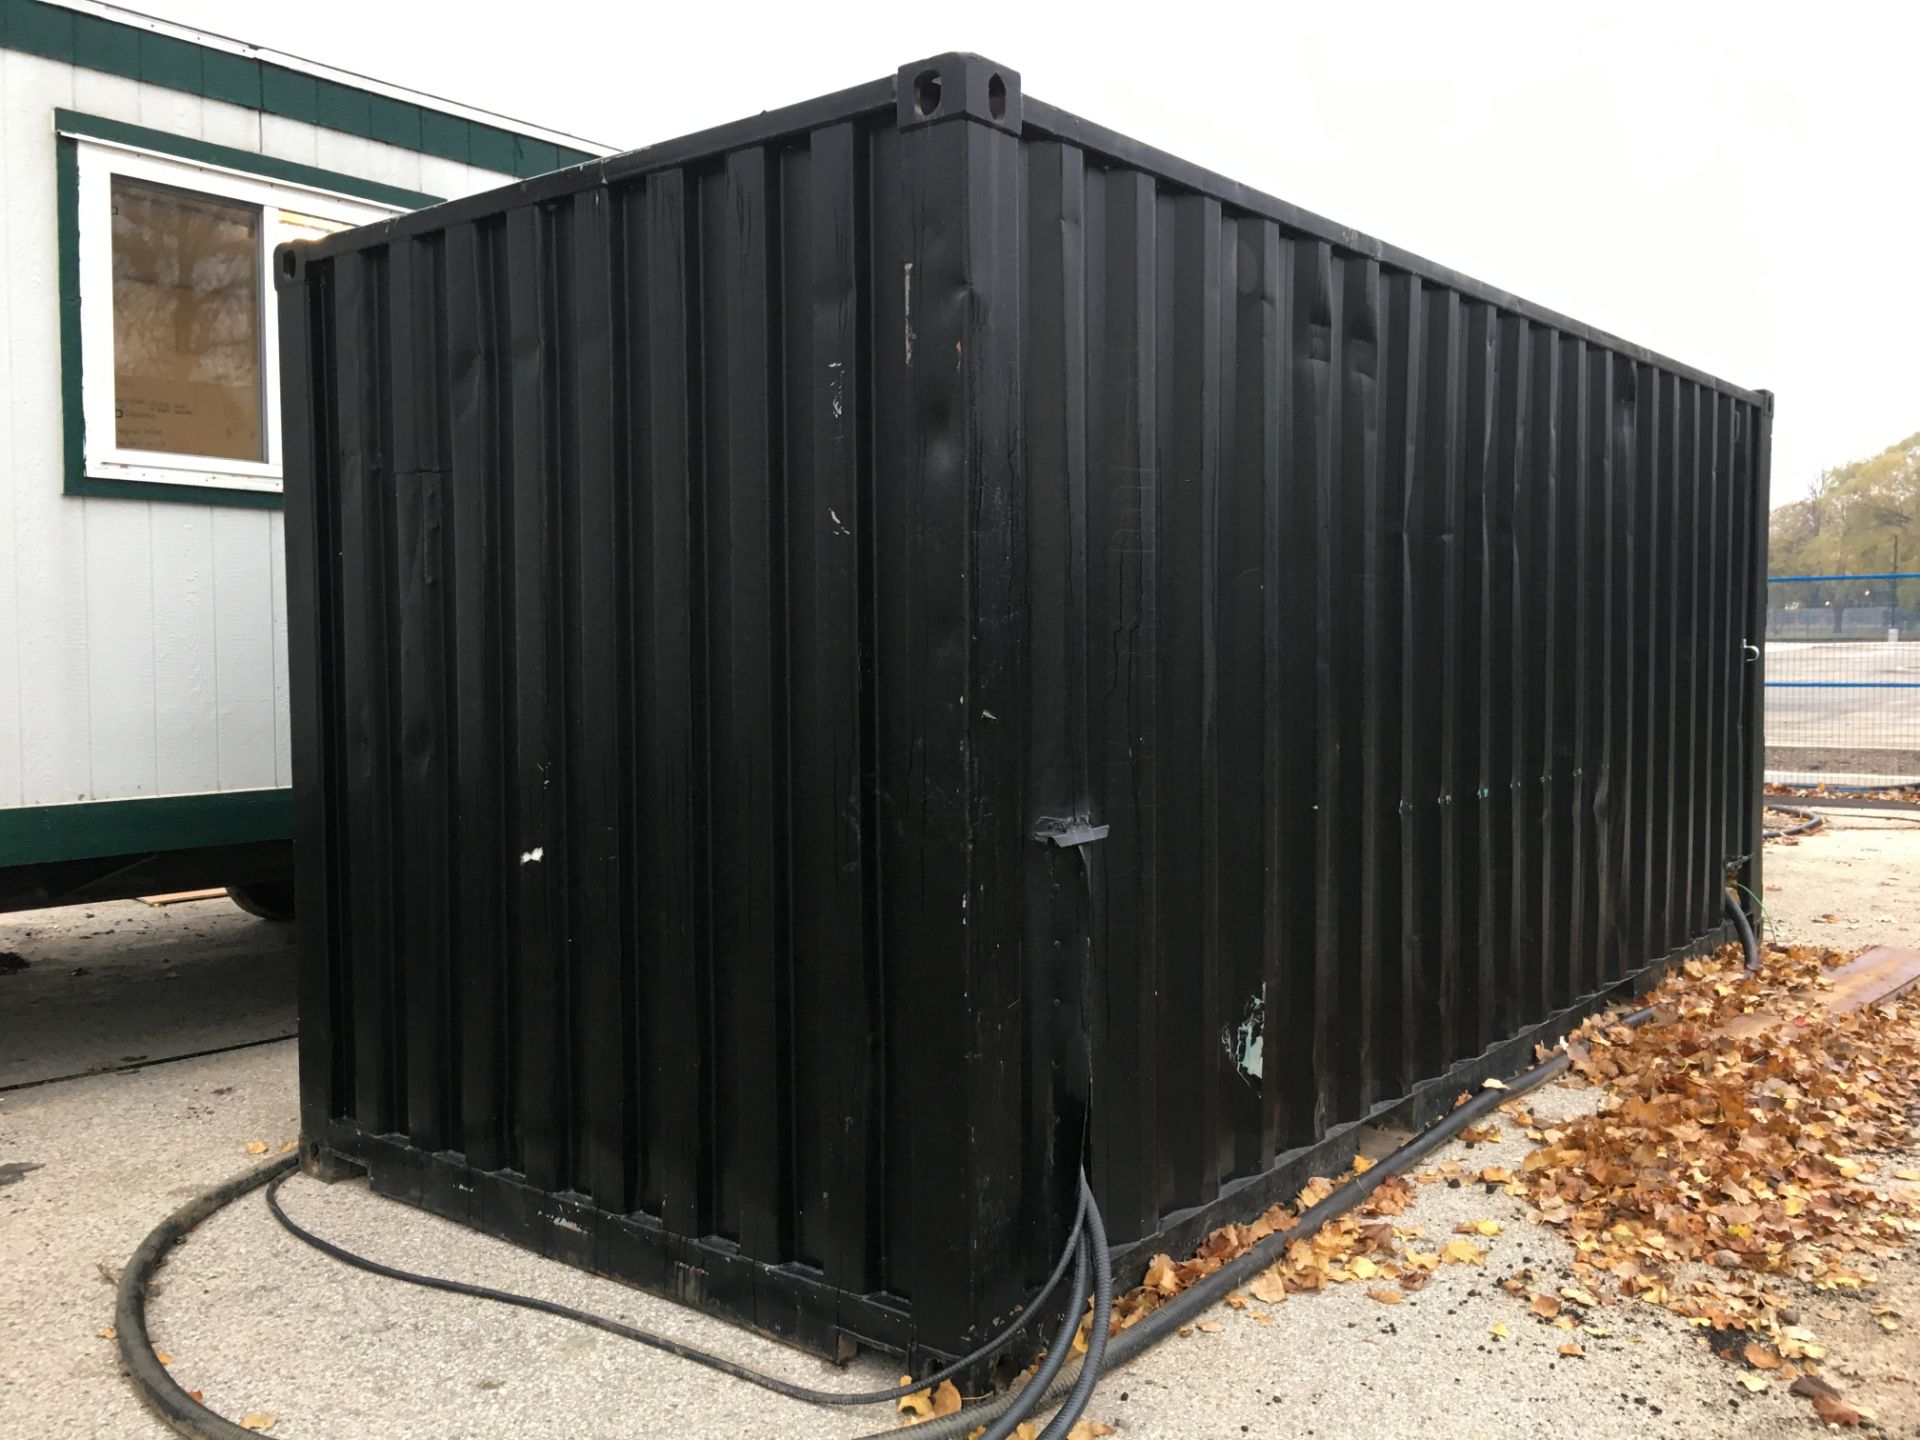 20' X 8' TEMPORARY POWER SEA CONTAINER W/600V TO 400A FUSIBLE DISCONNECT 3 PHASE, 400A/600V - Image 2 of 5